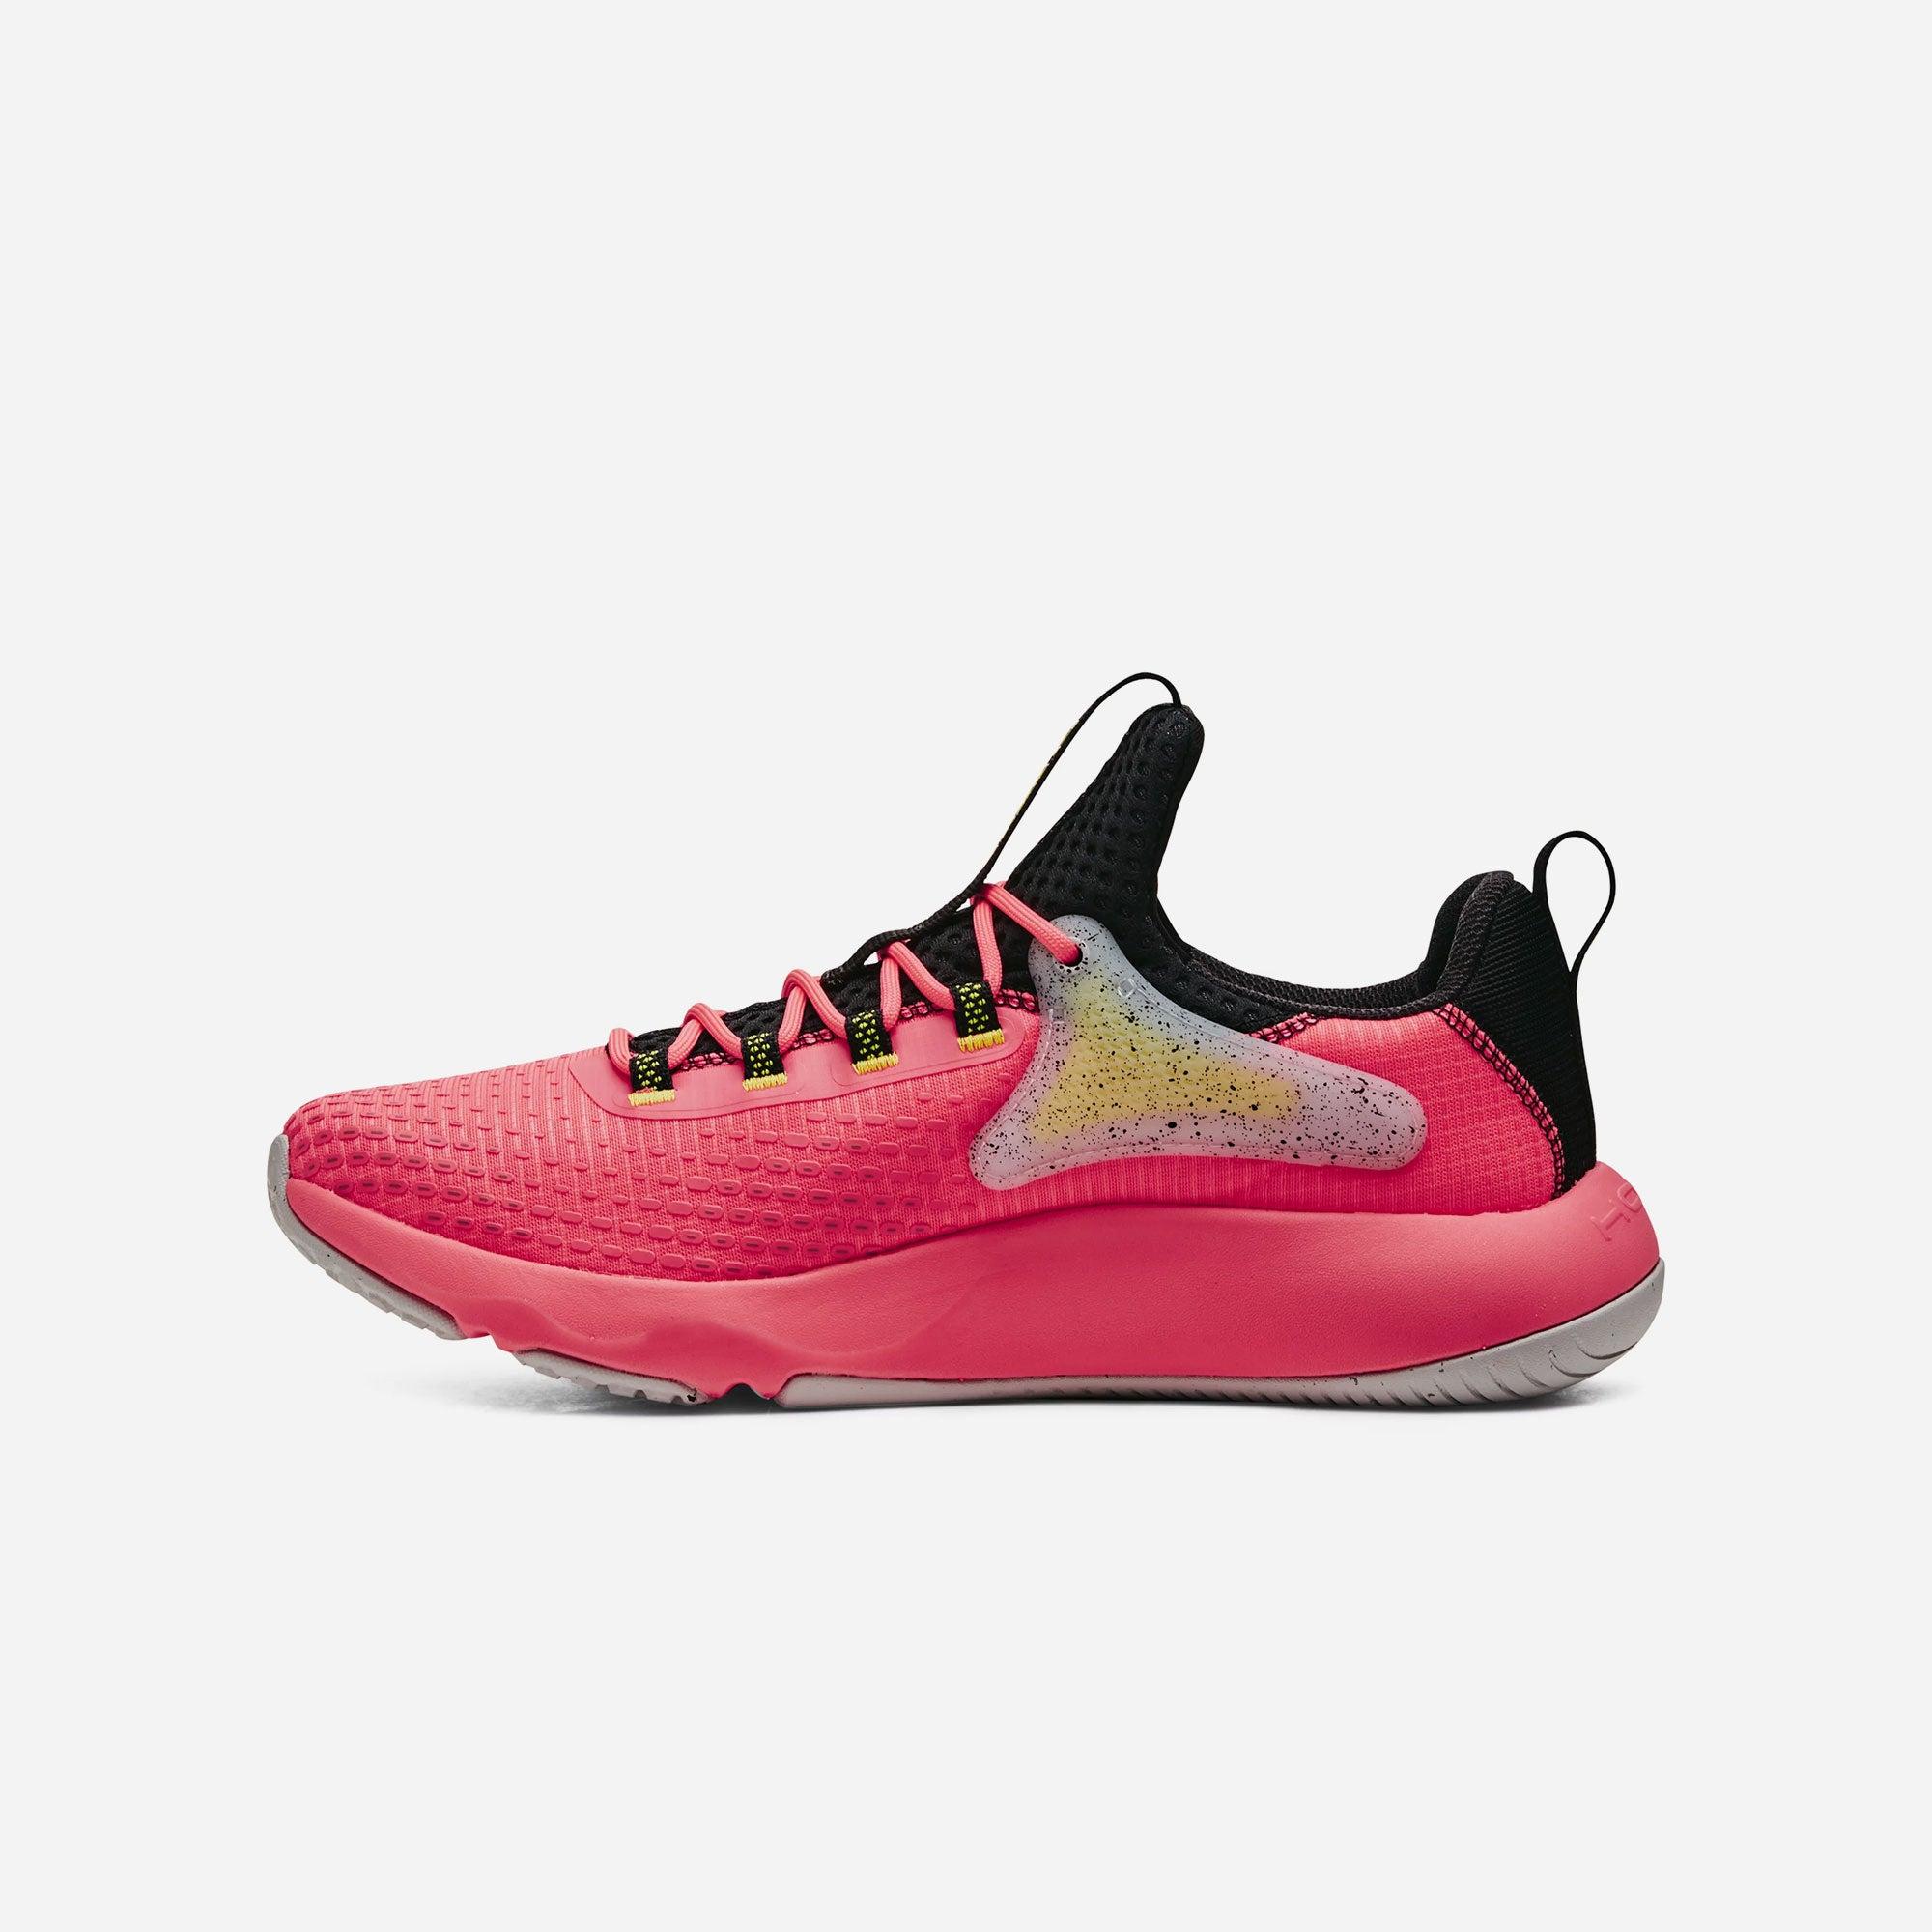 Giày thể thao nam Under Armour Rise 4 - 3025565-600